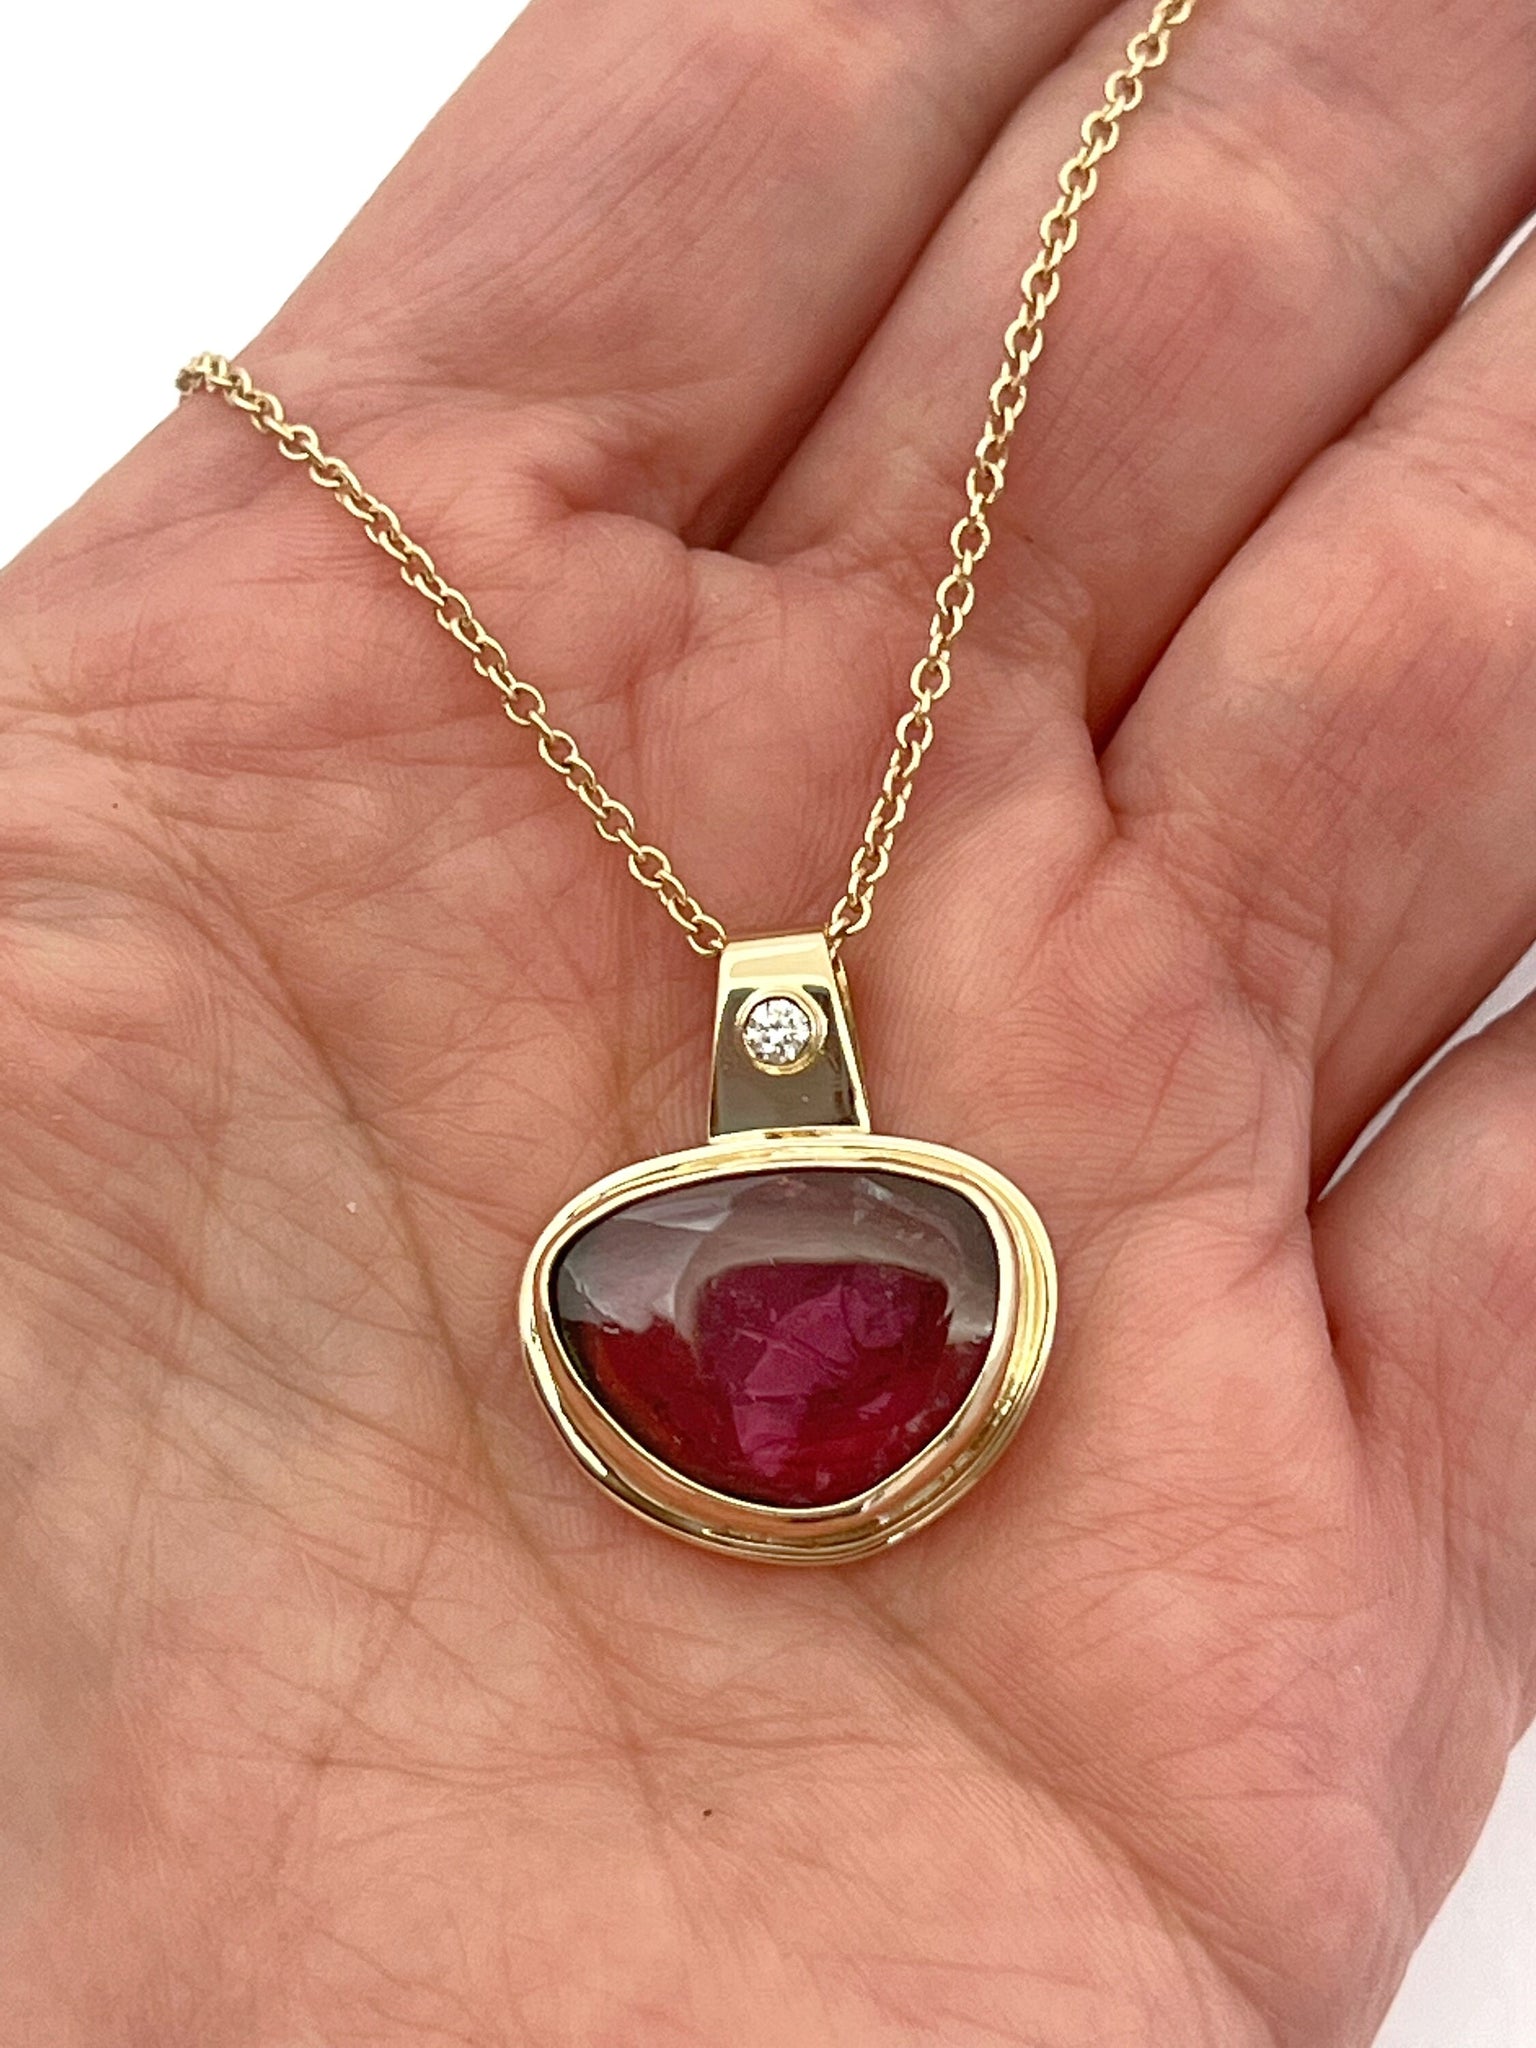 Watermelon Tourmaline Pendant In 14k Gold and Silver, Tourmaline and Diamond Necklace